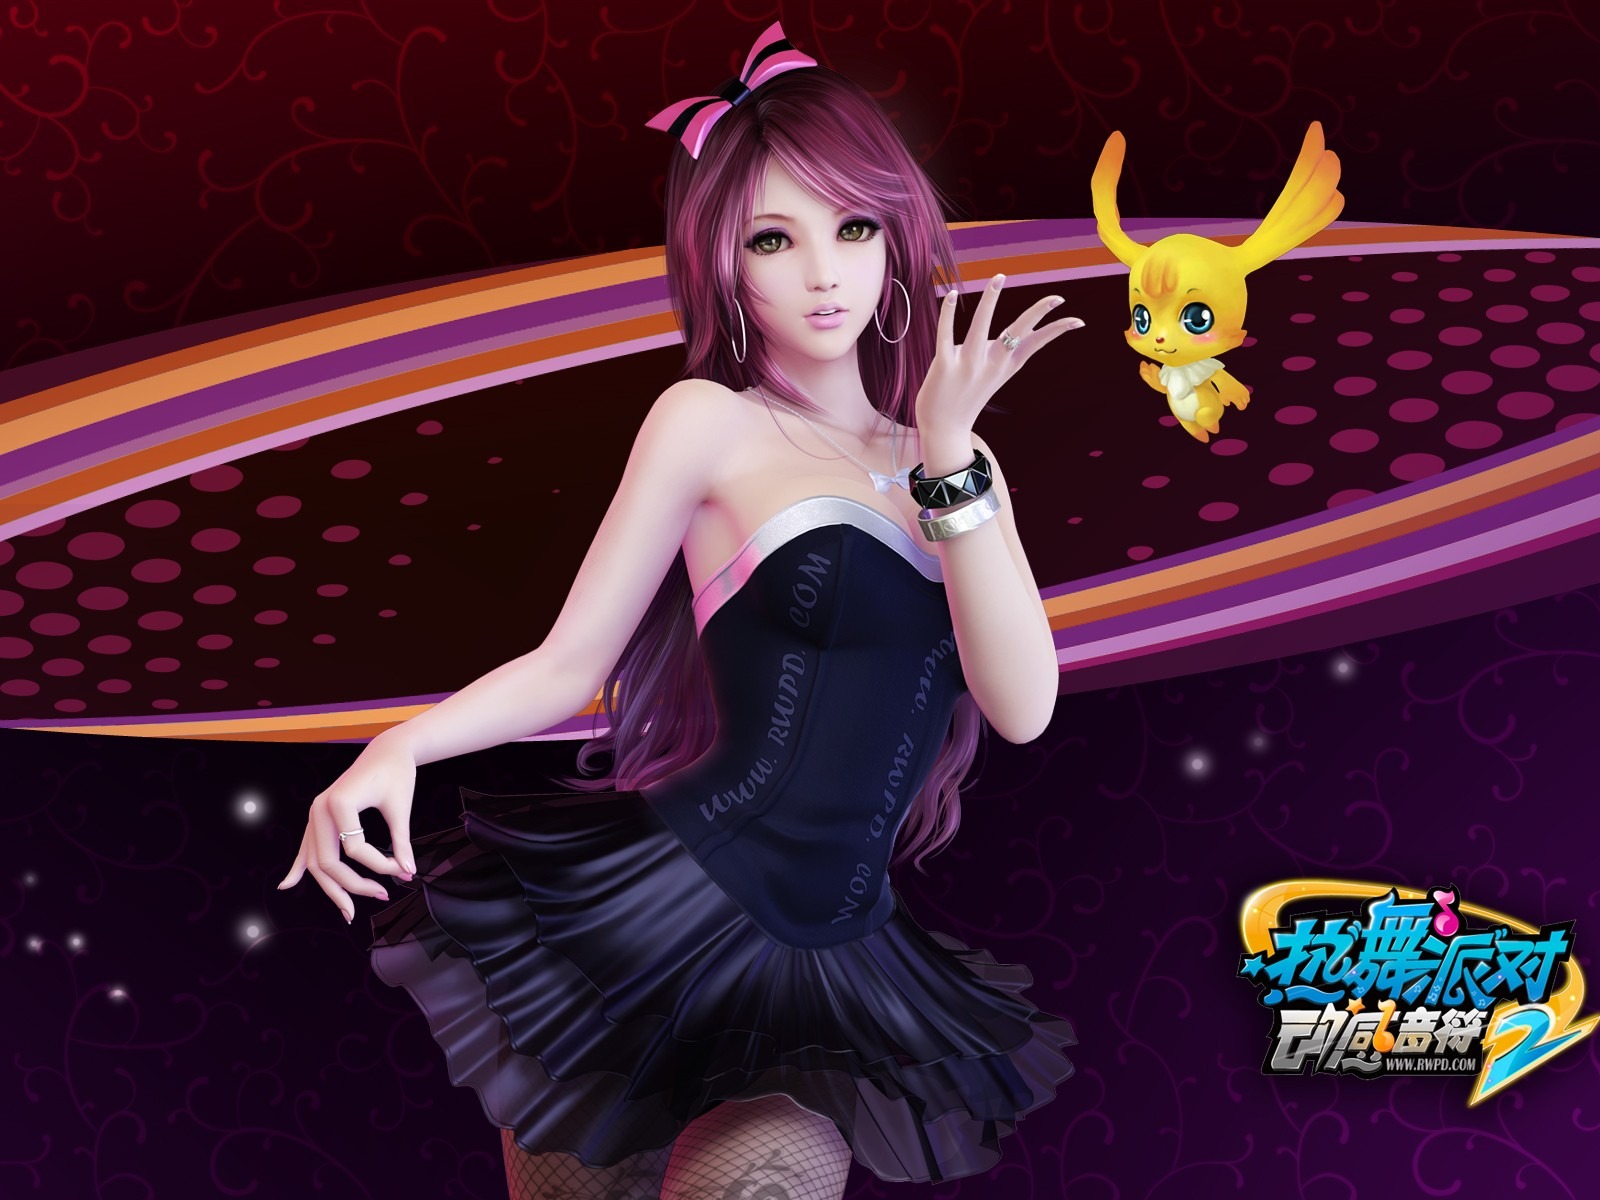 Online game Hot Dance Party II official wallpapers #28 - 1600x1200